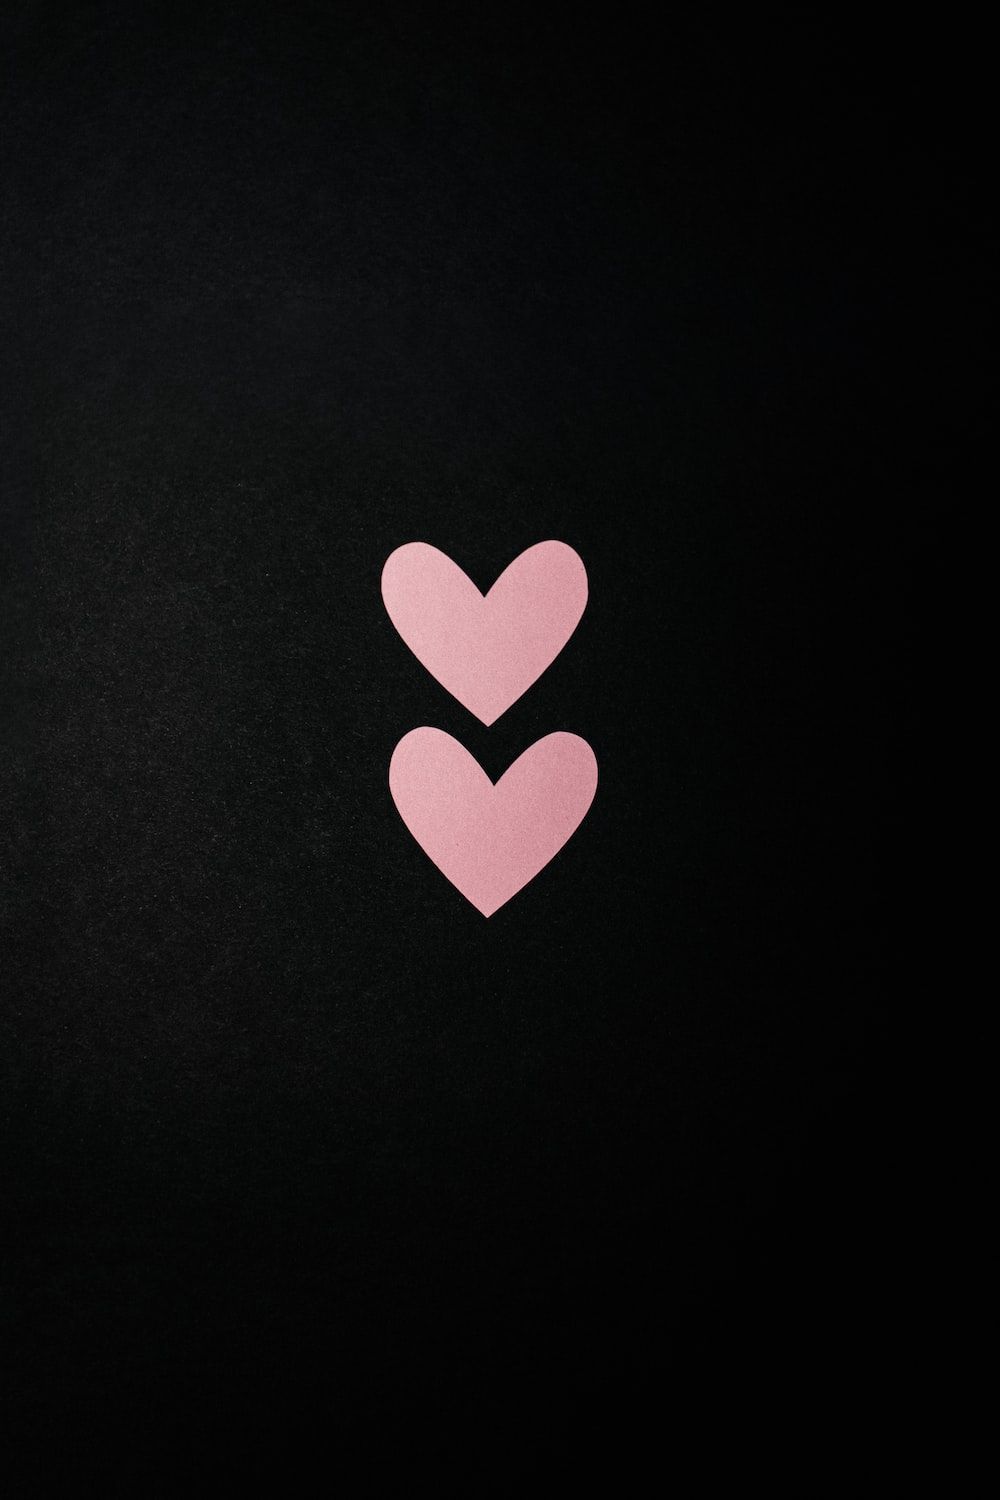 A black background with two pink hearts - Pink heart